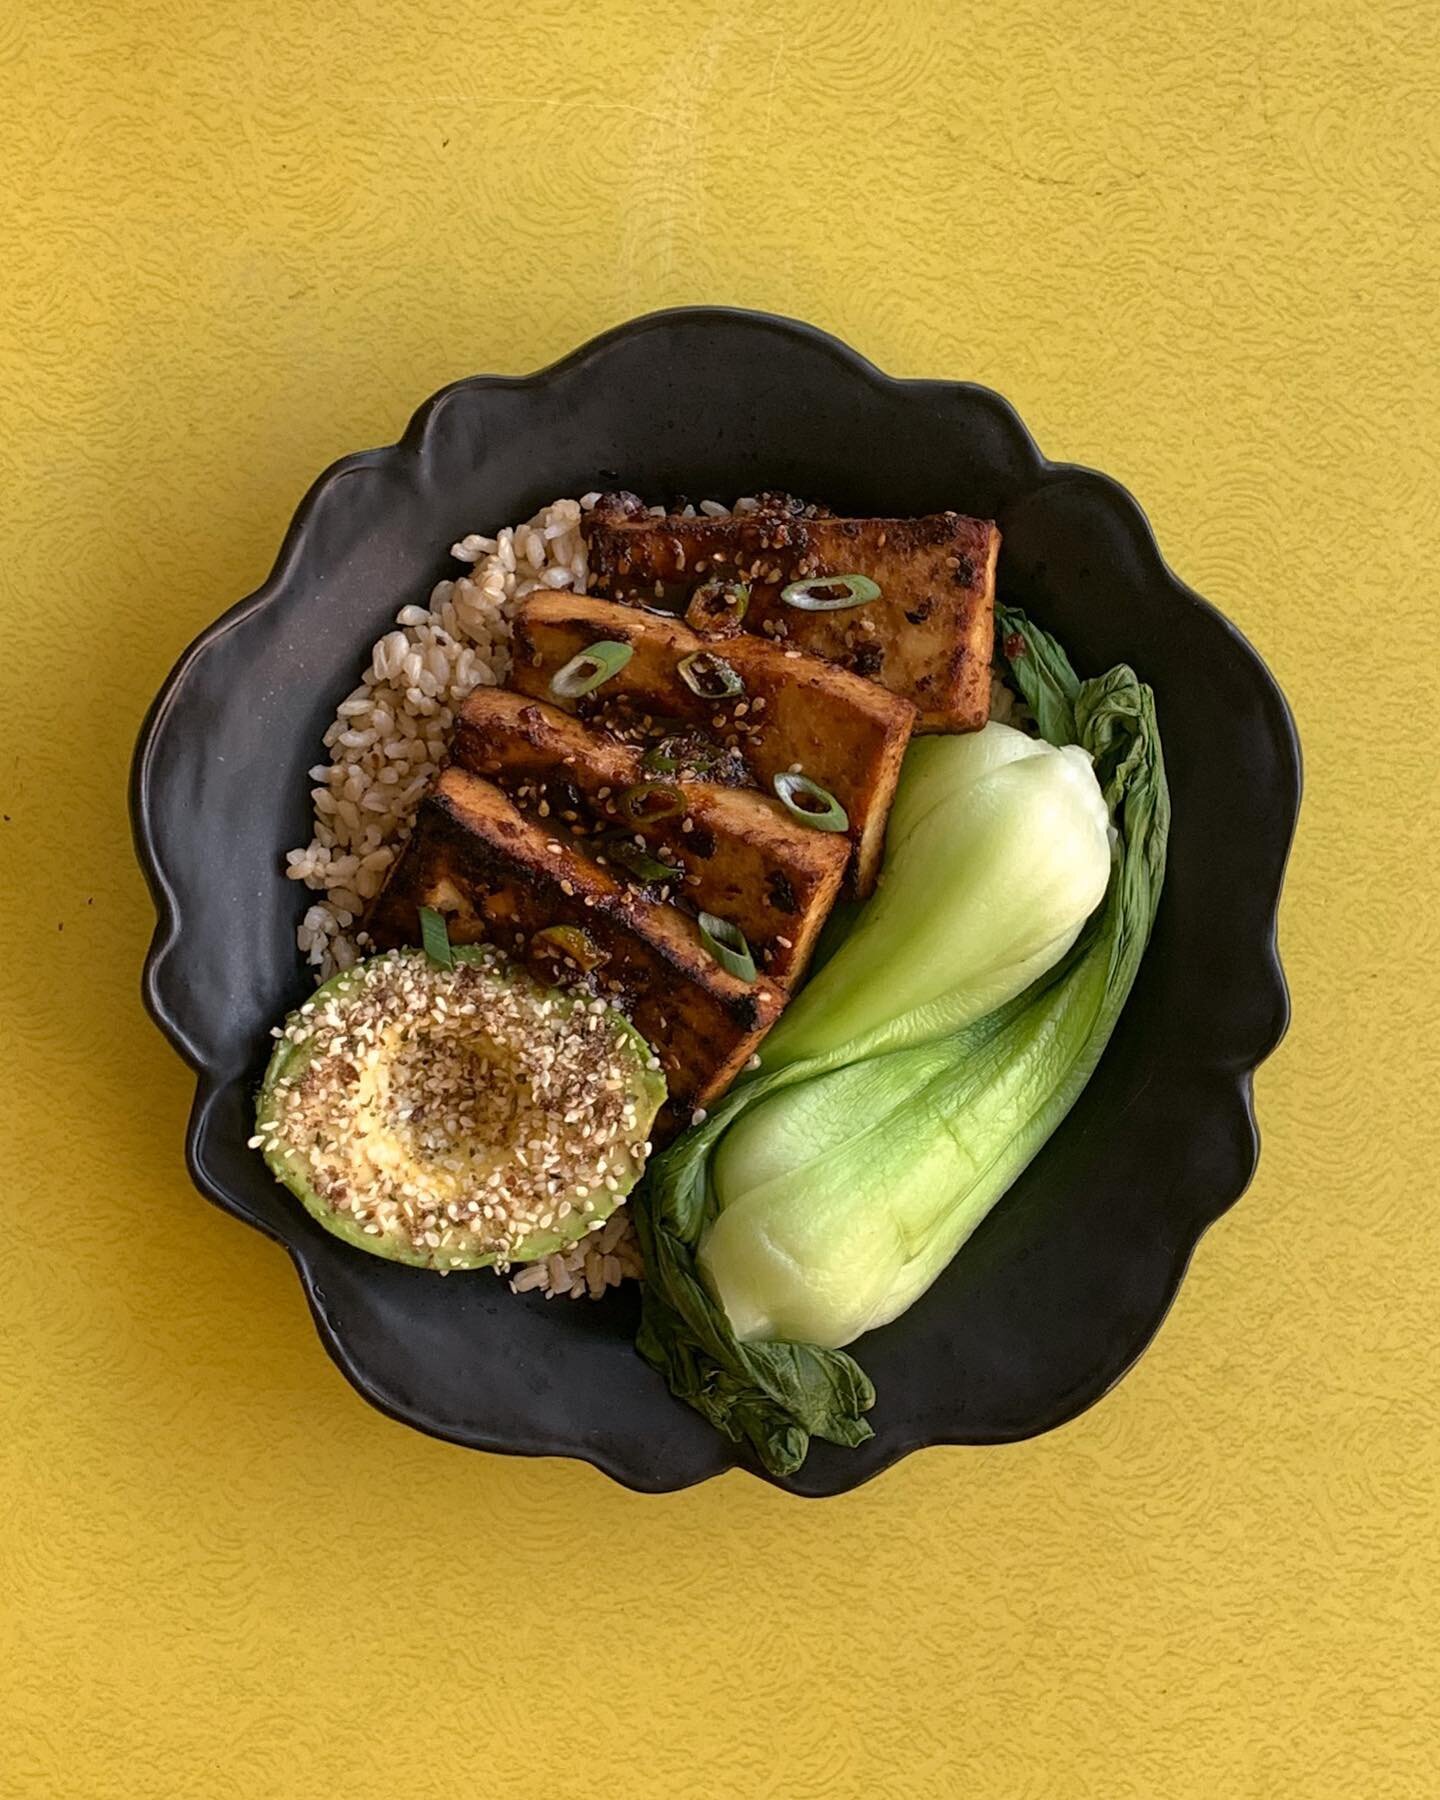 Lunch time!

Baked tofu with sesame miso glaze. Steamed bok choy. Seeded avocado. Brown rice. Finished with yangneomjang.

New table! Found it in the trash 🌸